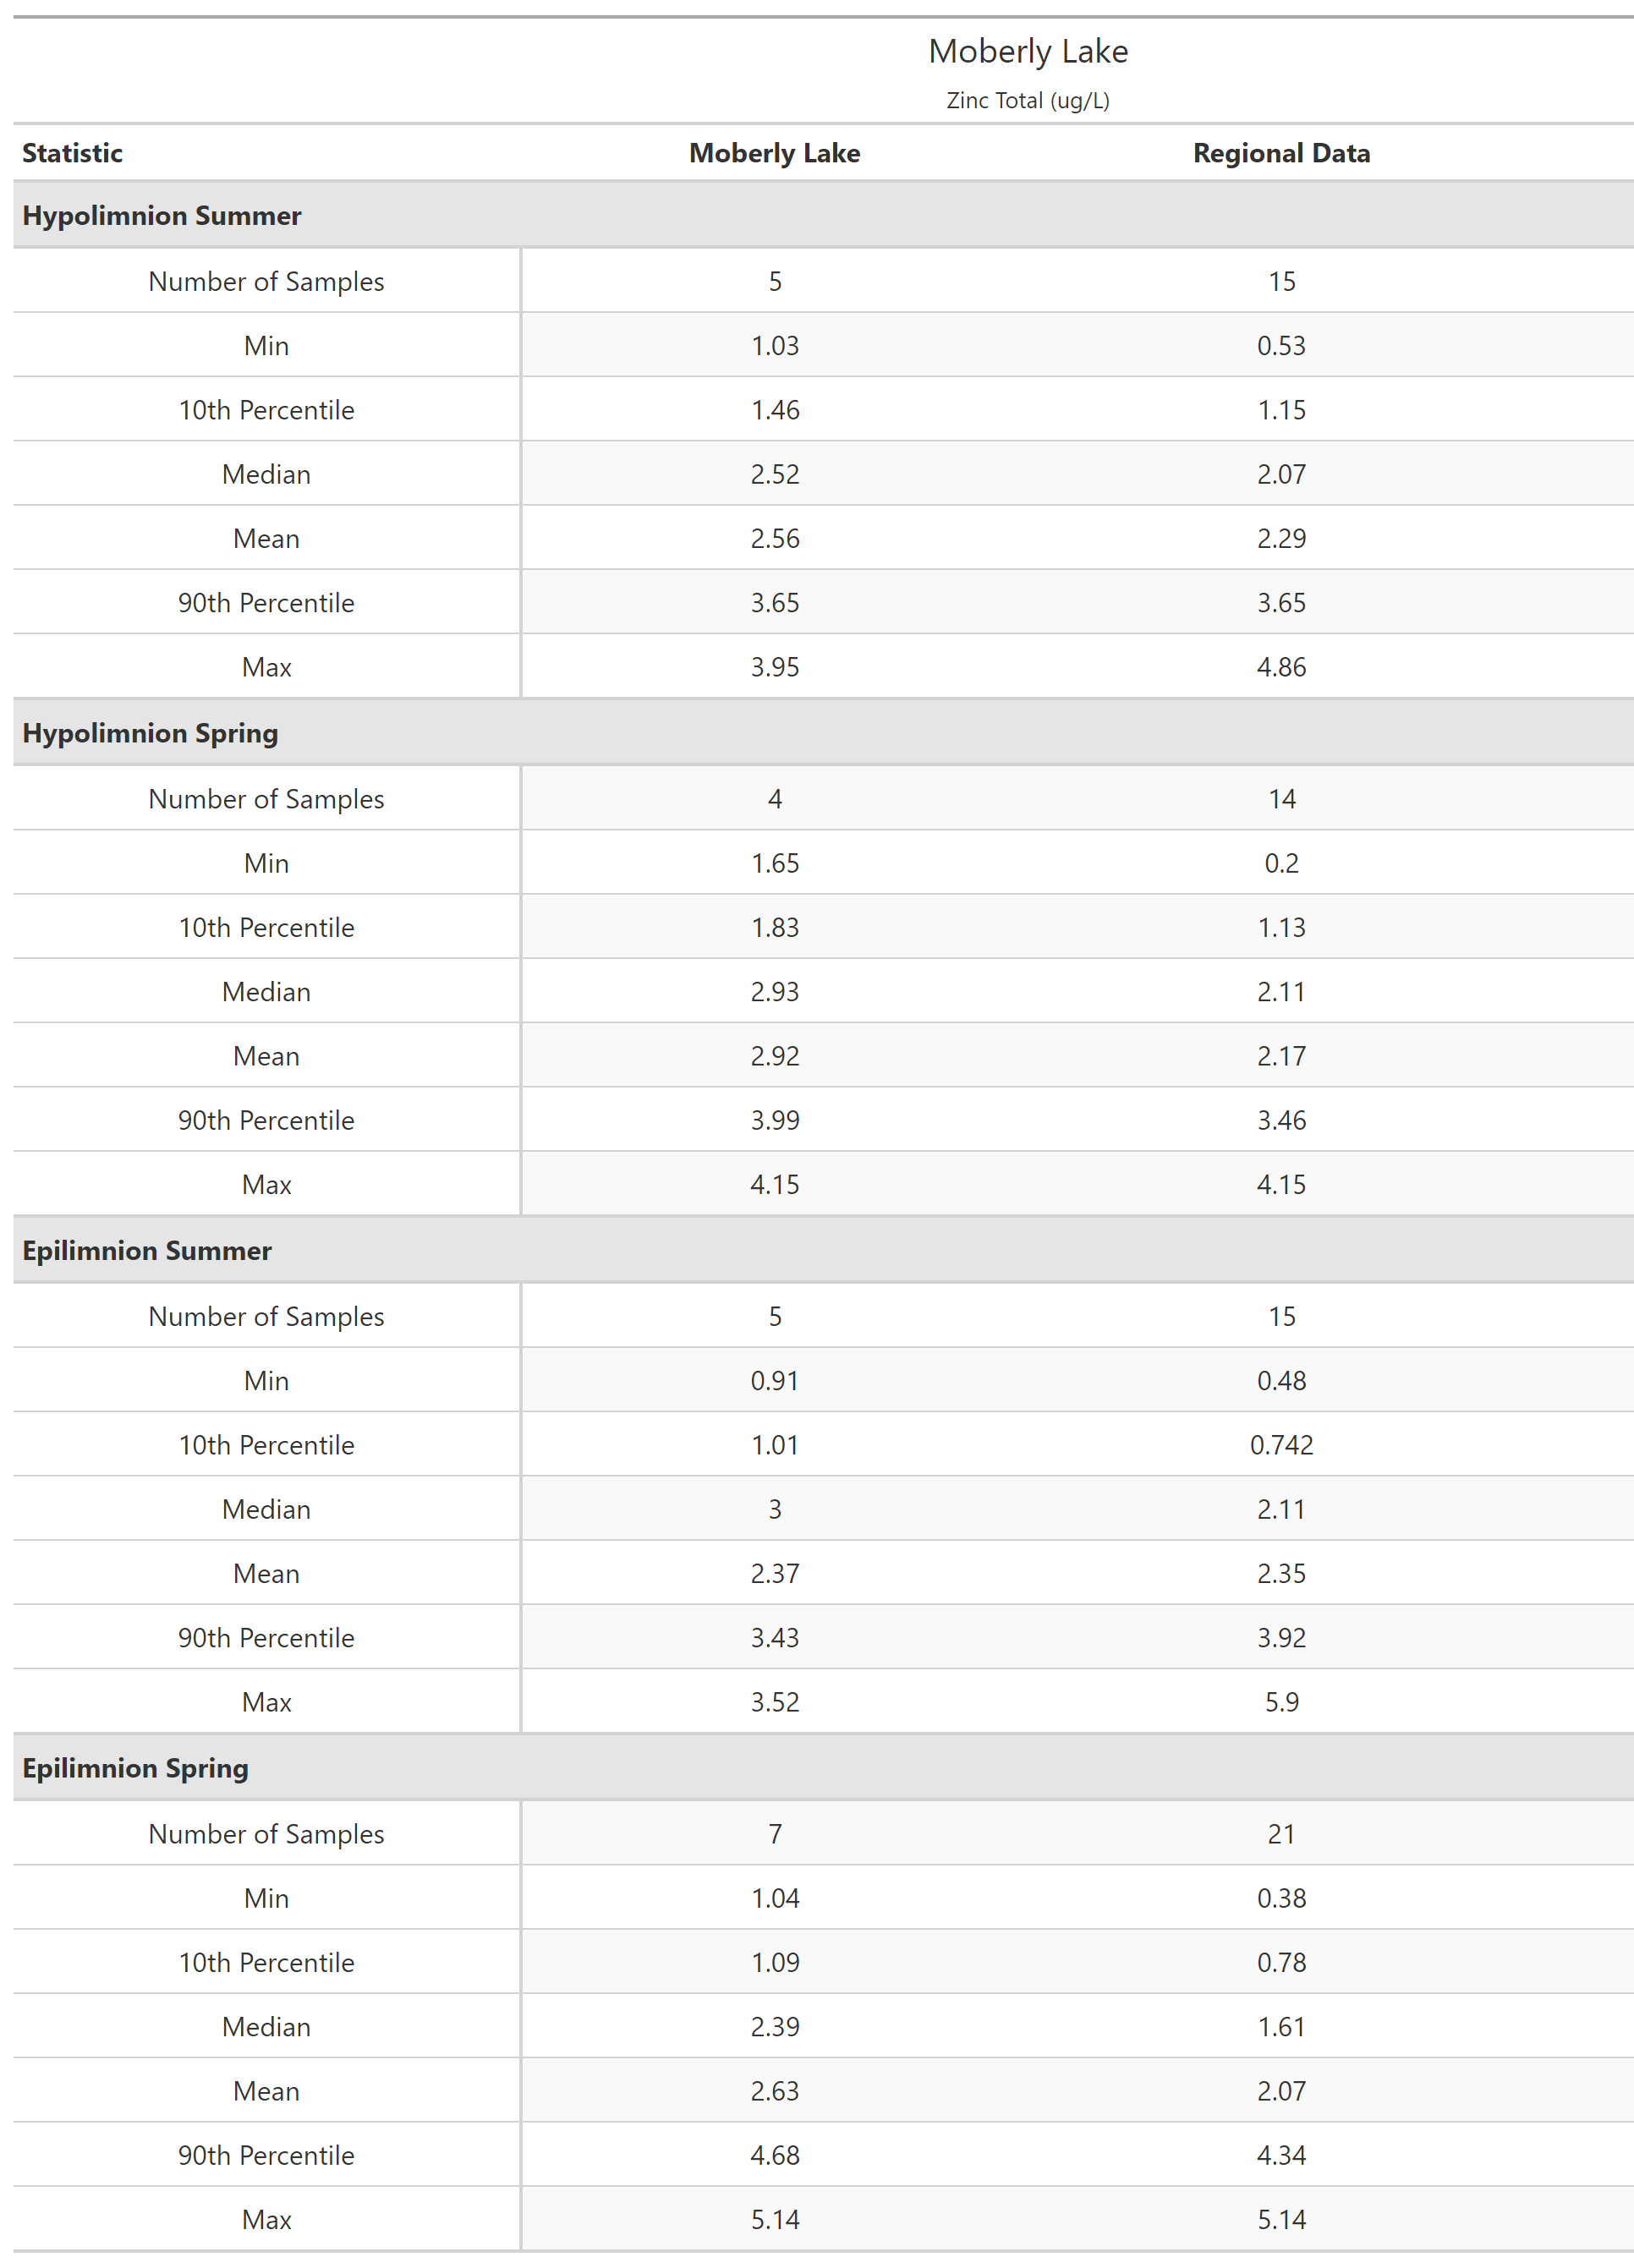 A table of summary statistics for Zinc Total with comparison to regional data